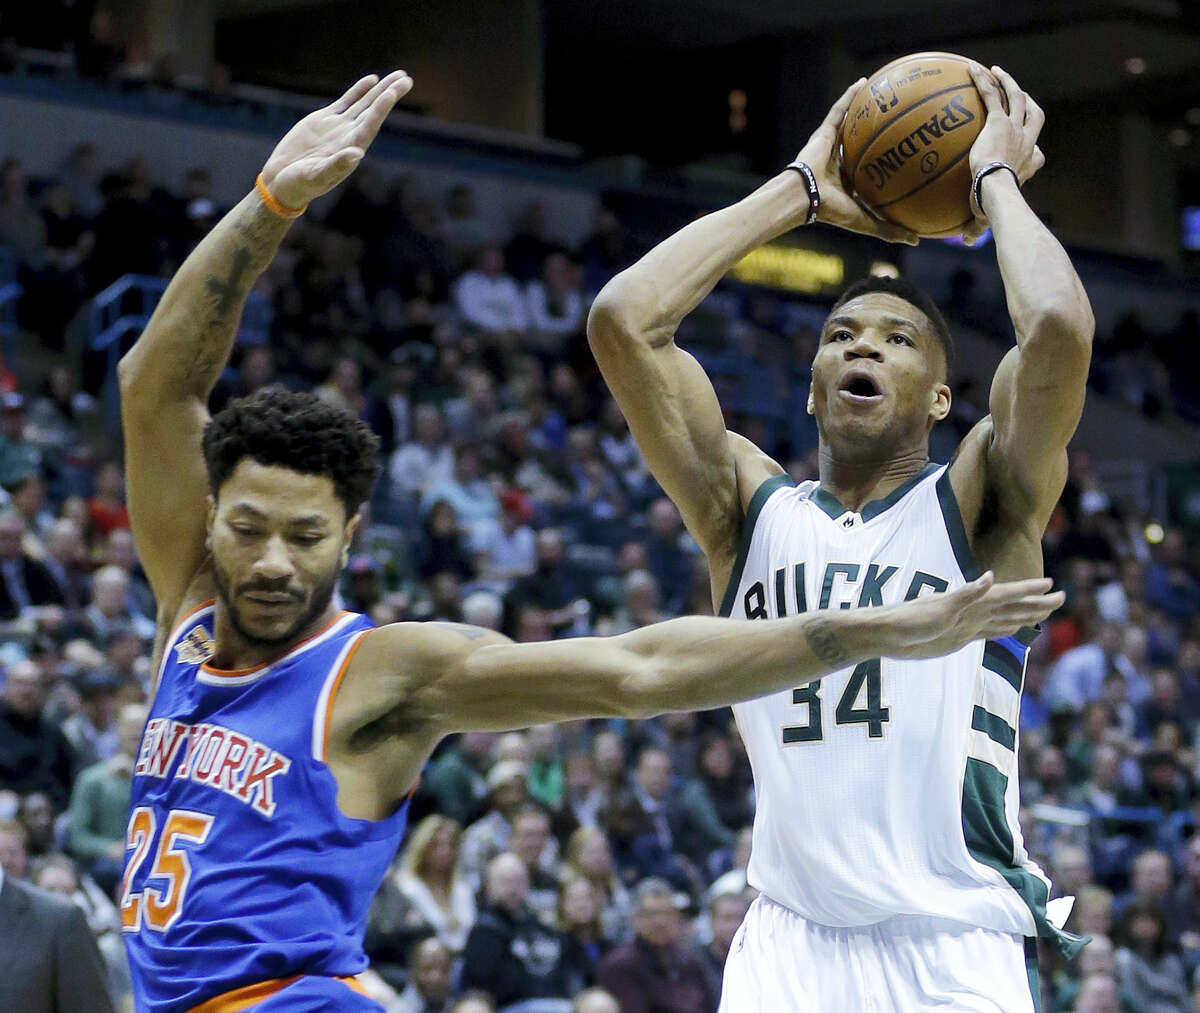 Milwaukee Bucks’ Giannis Antetokounmpo (34) drives past New York Knicks’ Derrick Rose (25) during the second half of an NBA basketball game March 8, 2017 in Milwaukee.